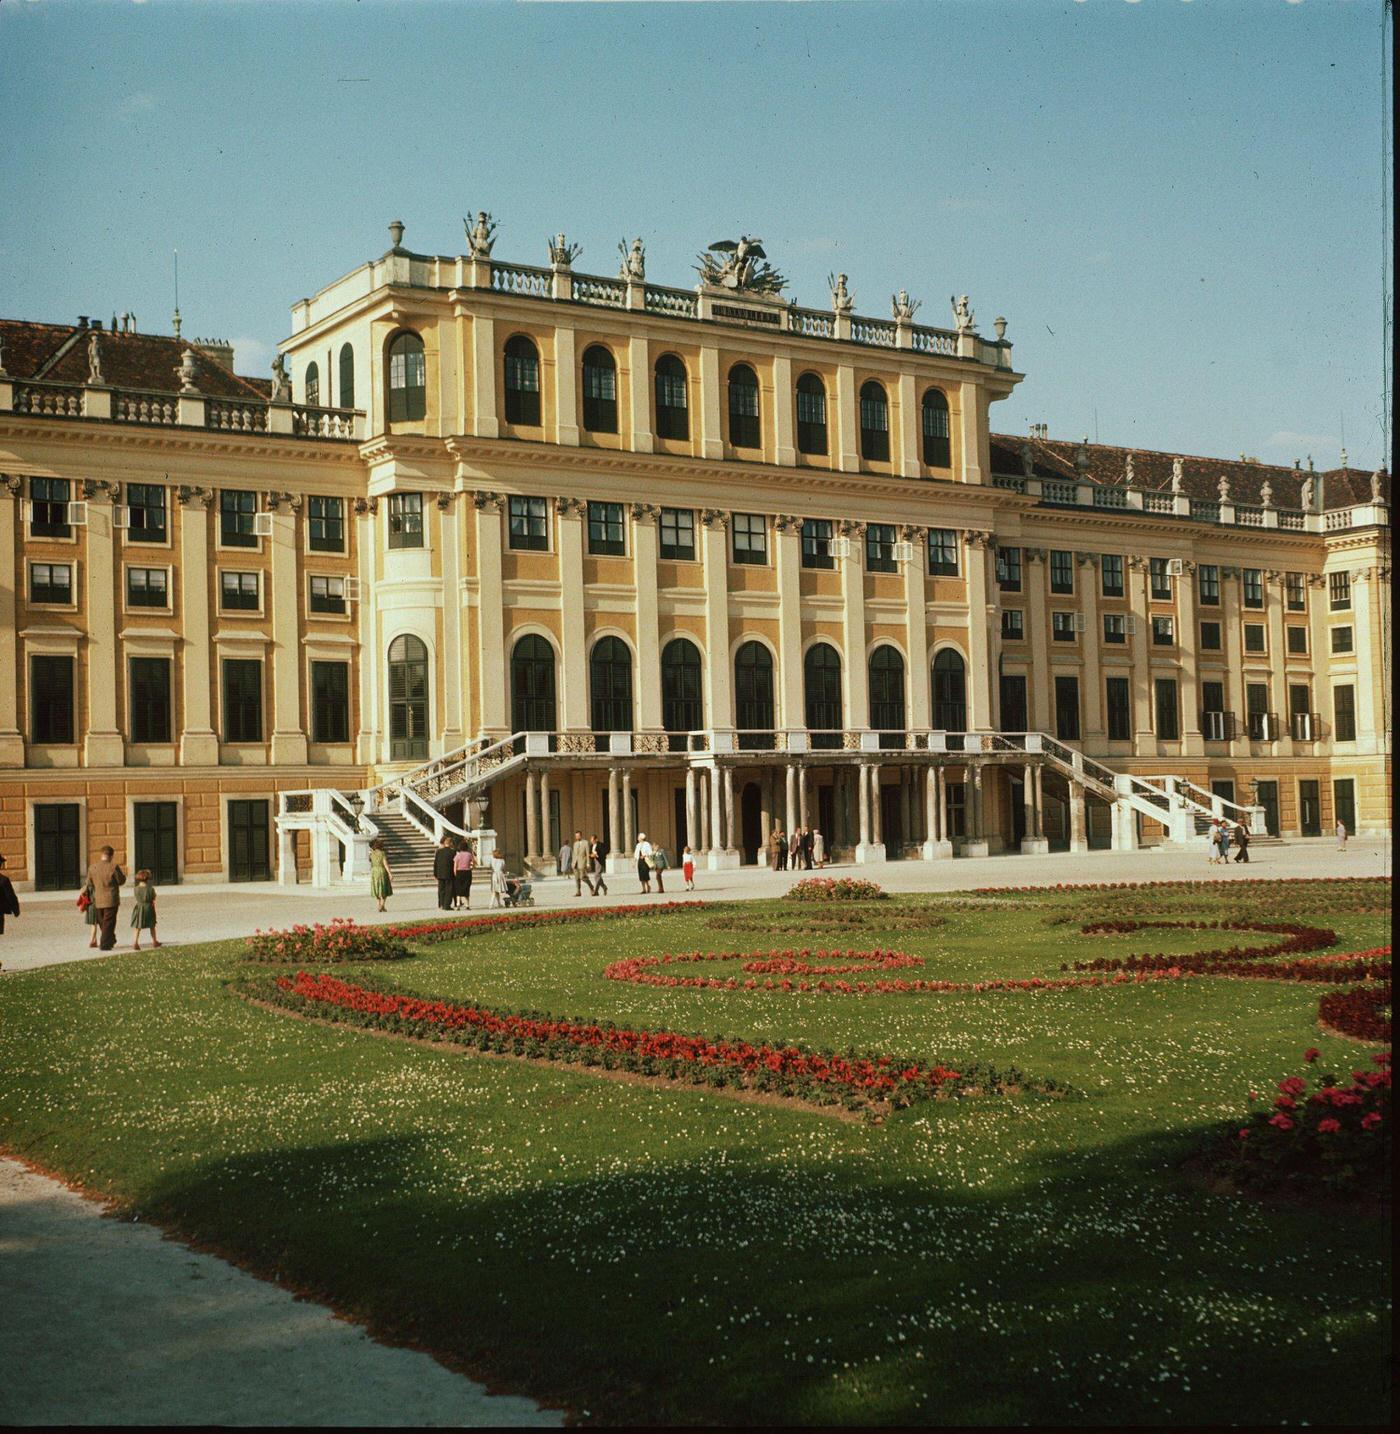 The palace of Schonbrunn in Vienna, Austria, home to the Habsburg dynasty of Austria-Hungary.